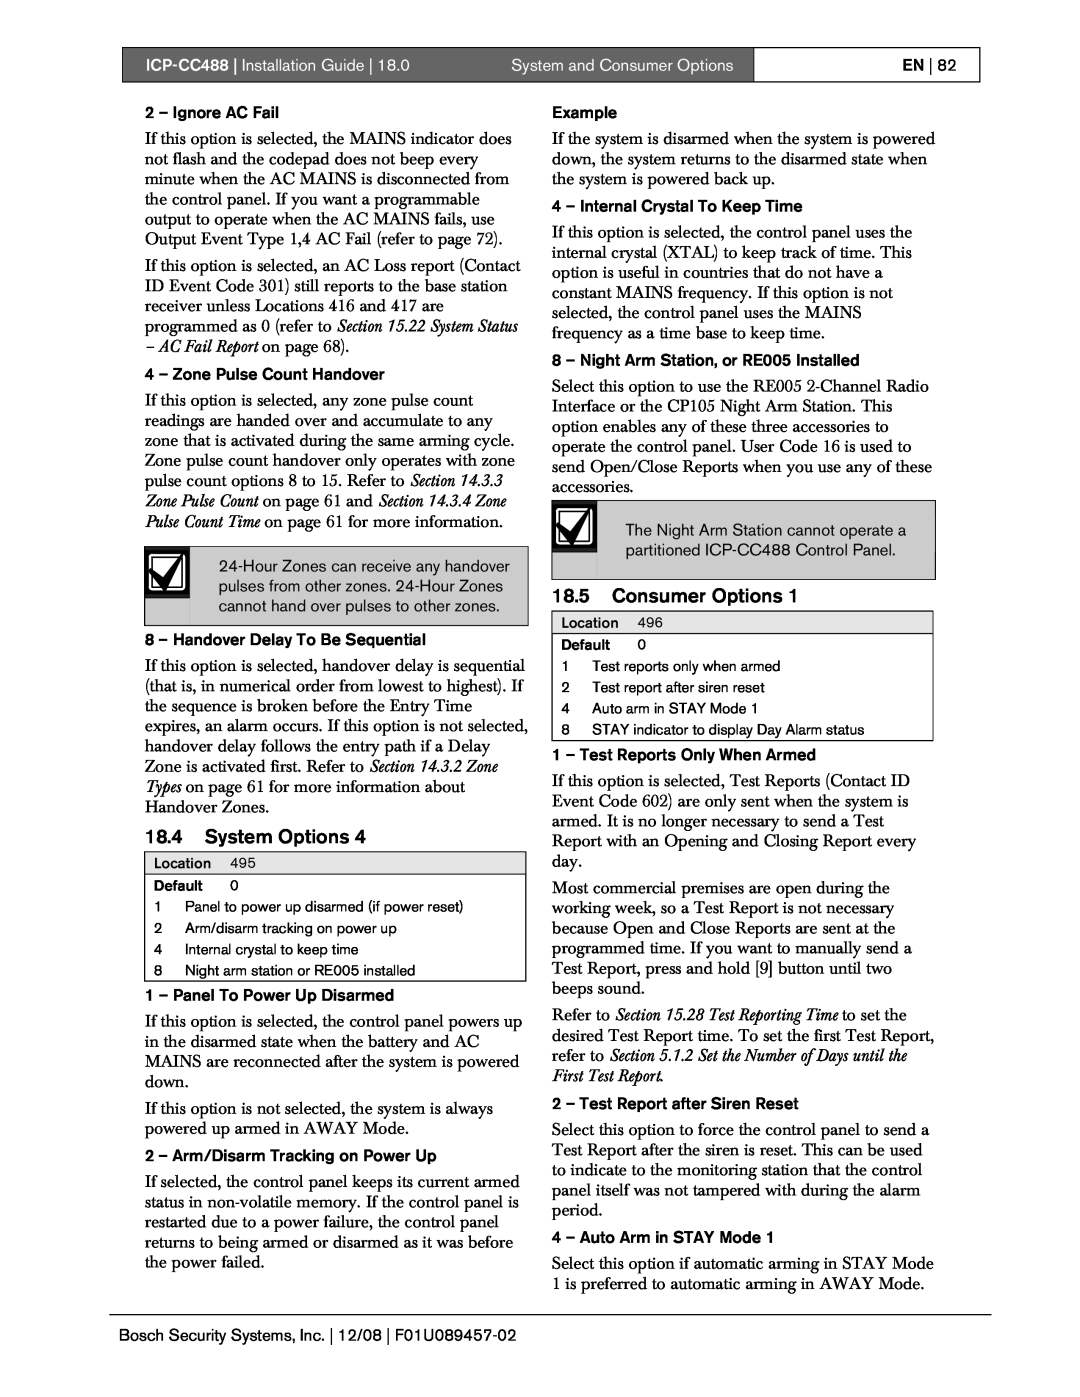 Bosch Appliances manual 18.4System Options, 18.5Consumer Options, AC Fail Report on page, ICP-CC488| Installation Guide 